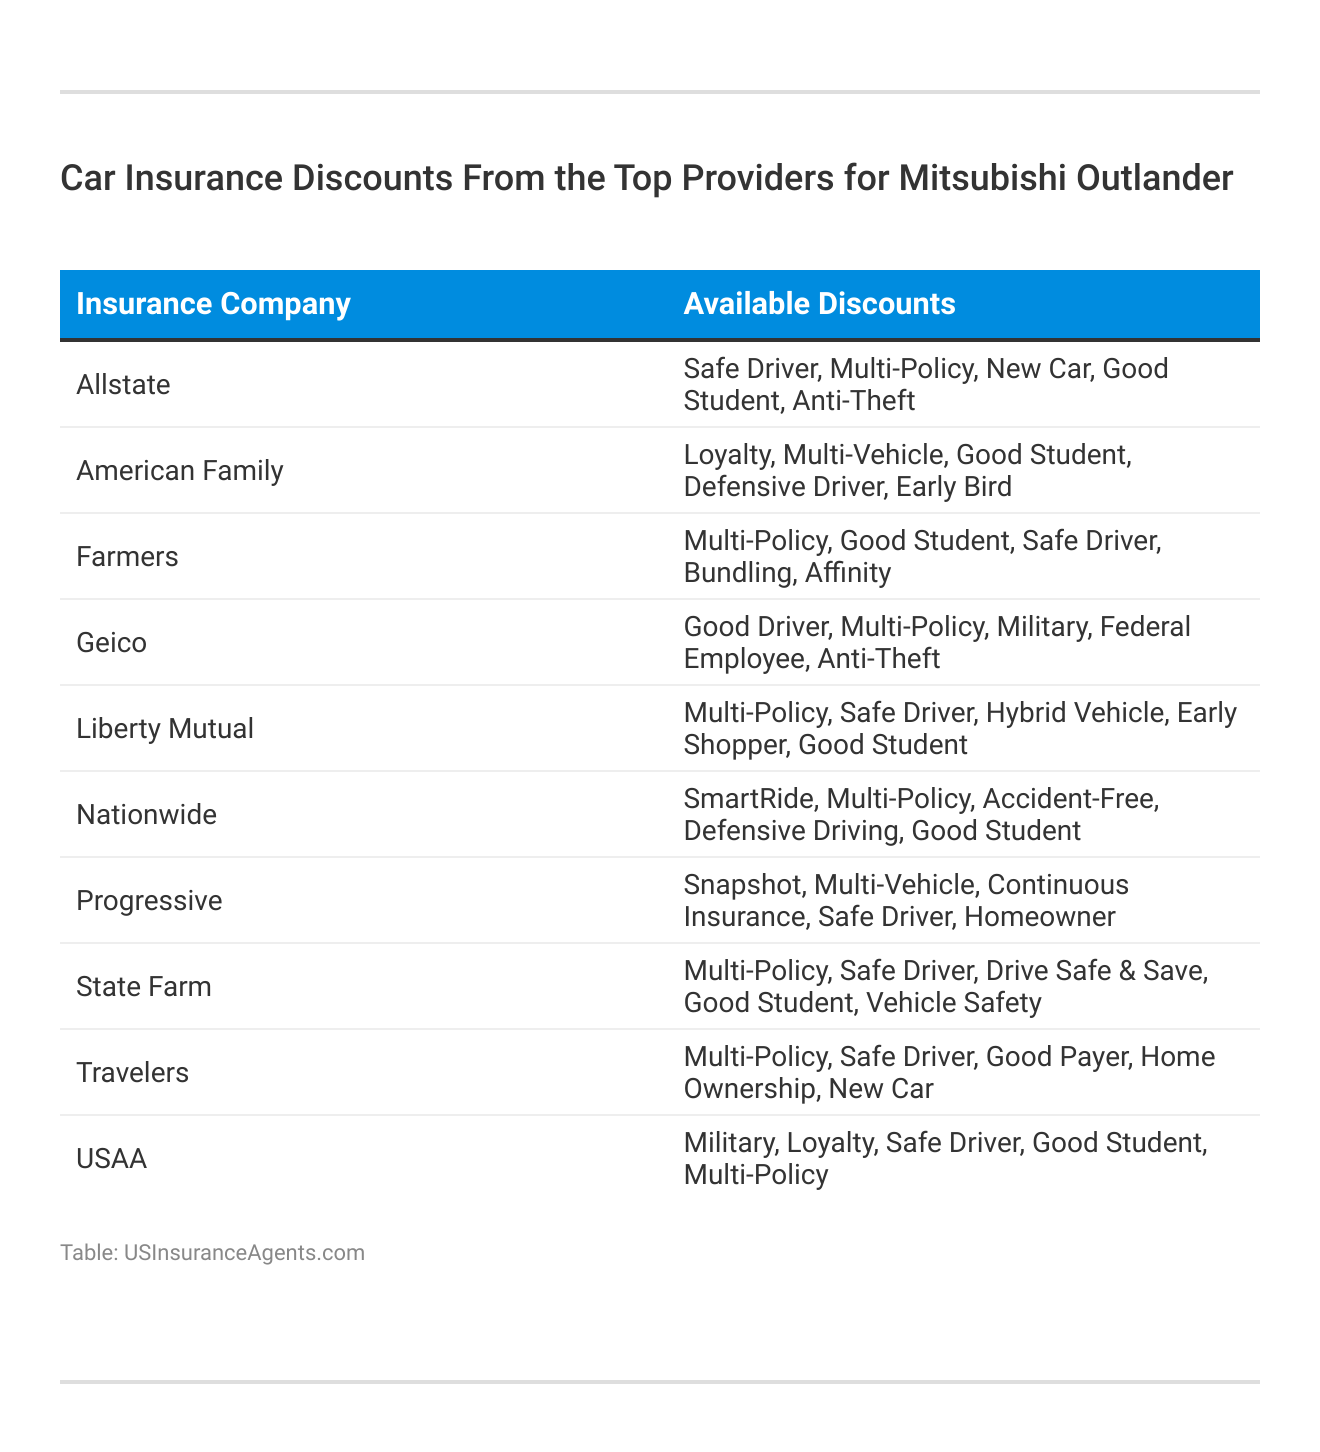 <h3>Car Insurance Discounts From the Top Providers for Mitsubishi Outlander</h3>